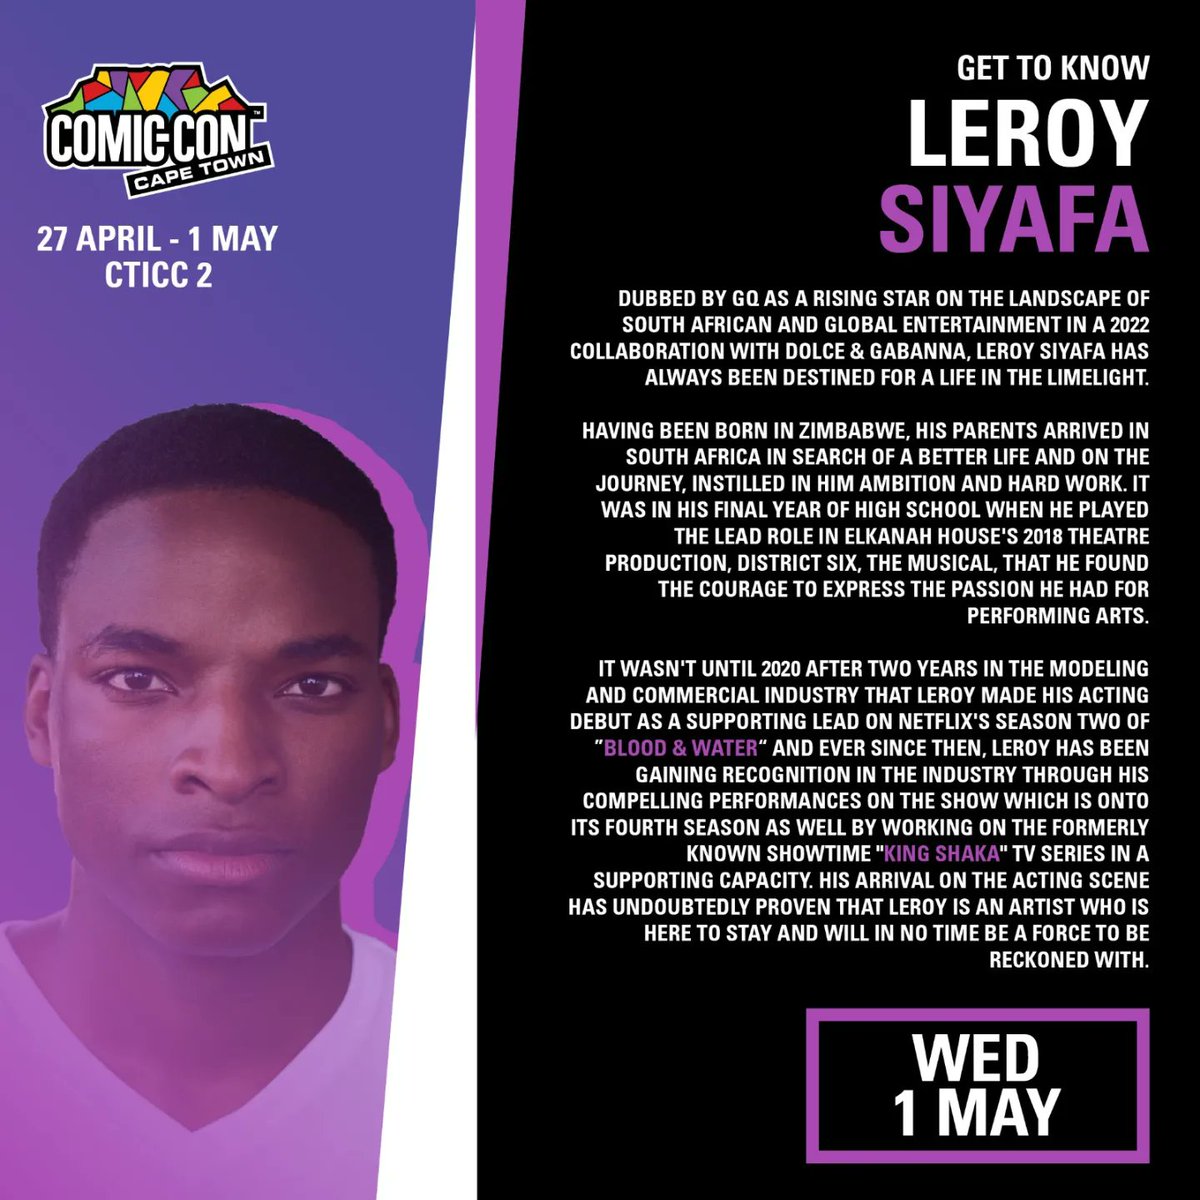 Calling all Blood and Water fans! Brace yourselves for an electrifying experience as the local rising star @leroysiyafa takes the stage at #ComicConCapeTown on 1 May ! 😁